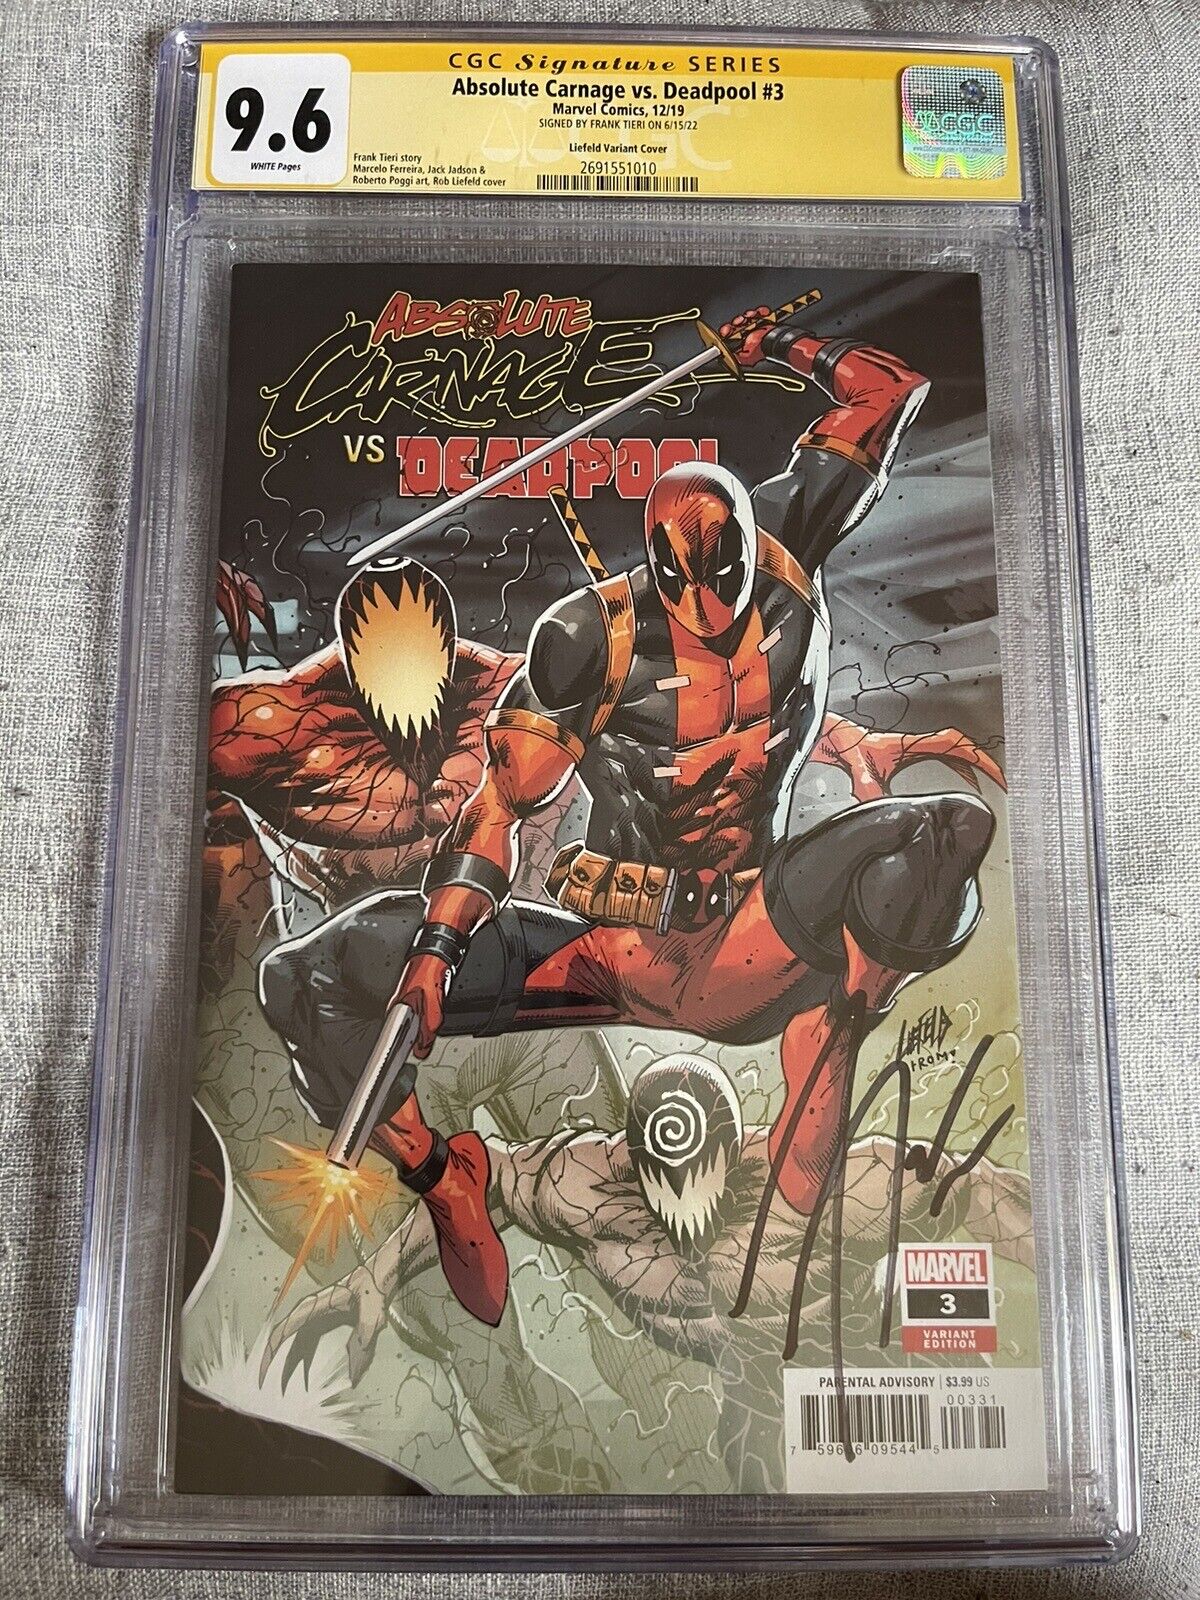 ABSOLUTE CARNAGE VS DEADPOOL #3 CGC SS 9.6 LIEFELD VARIANT Signed by FRANK TIERI